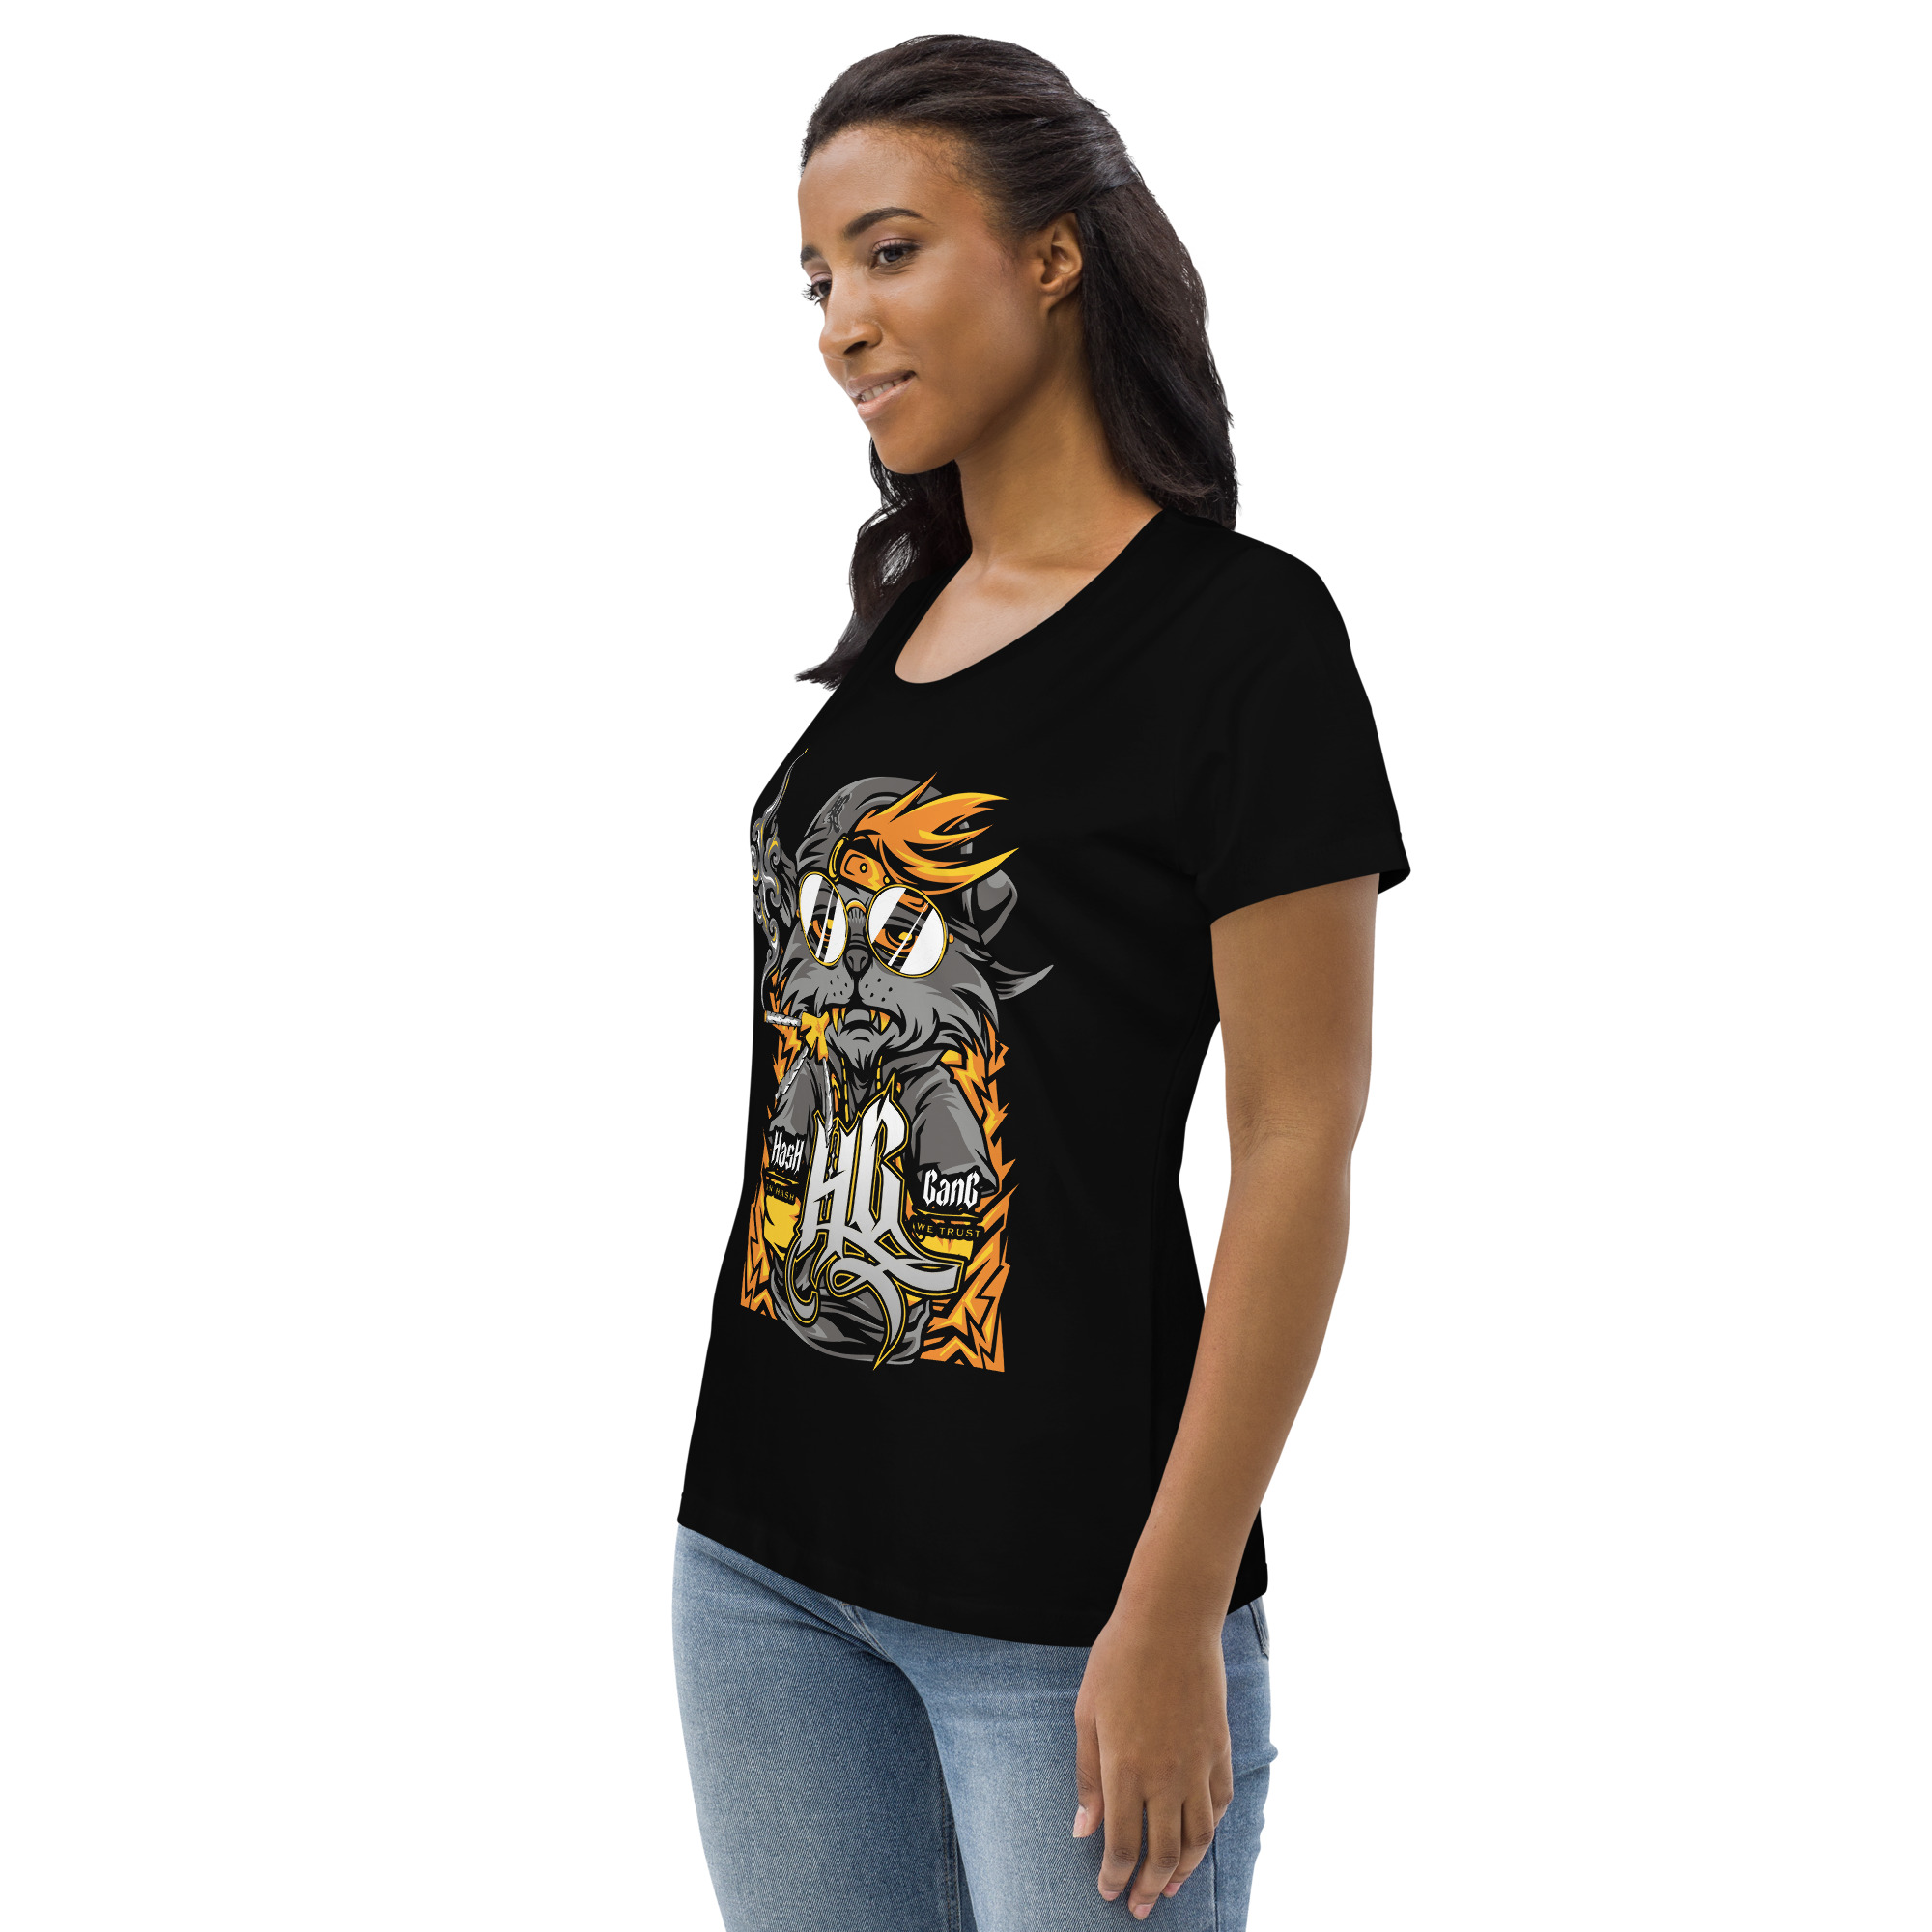 womens-fitted-eco-tee-black-left-front-65a7888113e6b.jpg